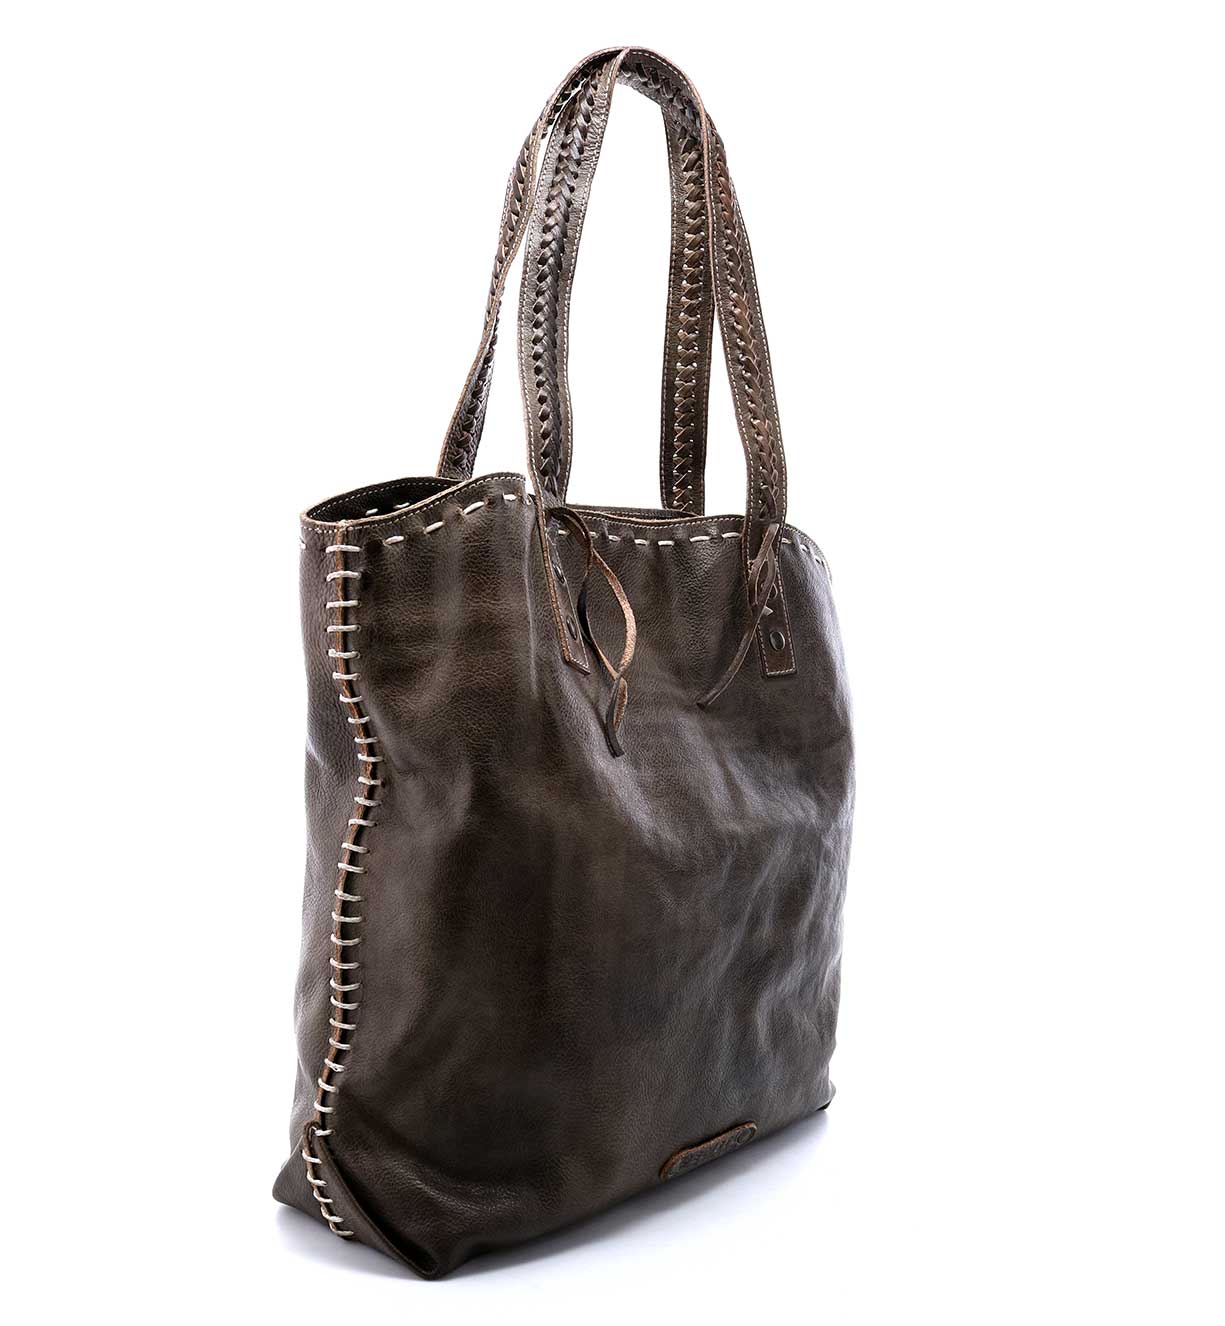 A Barra taupe leather tote bag by Bed Stu.